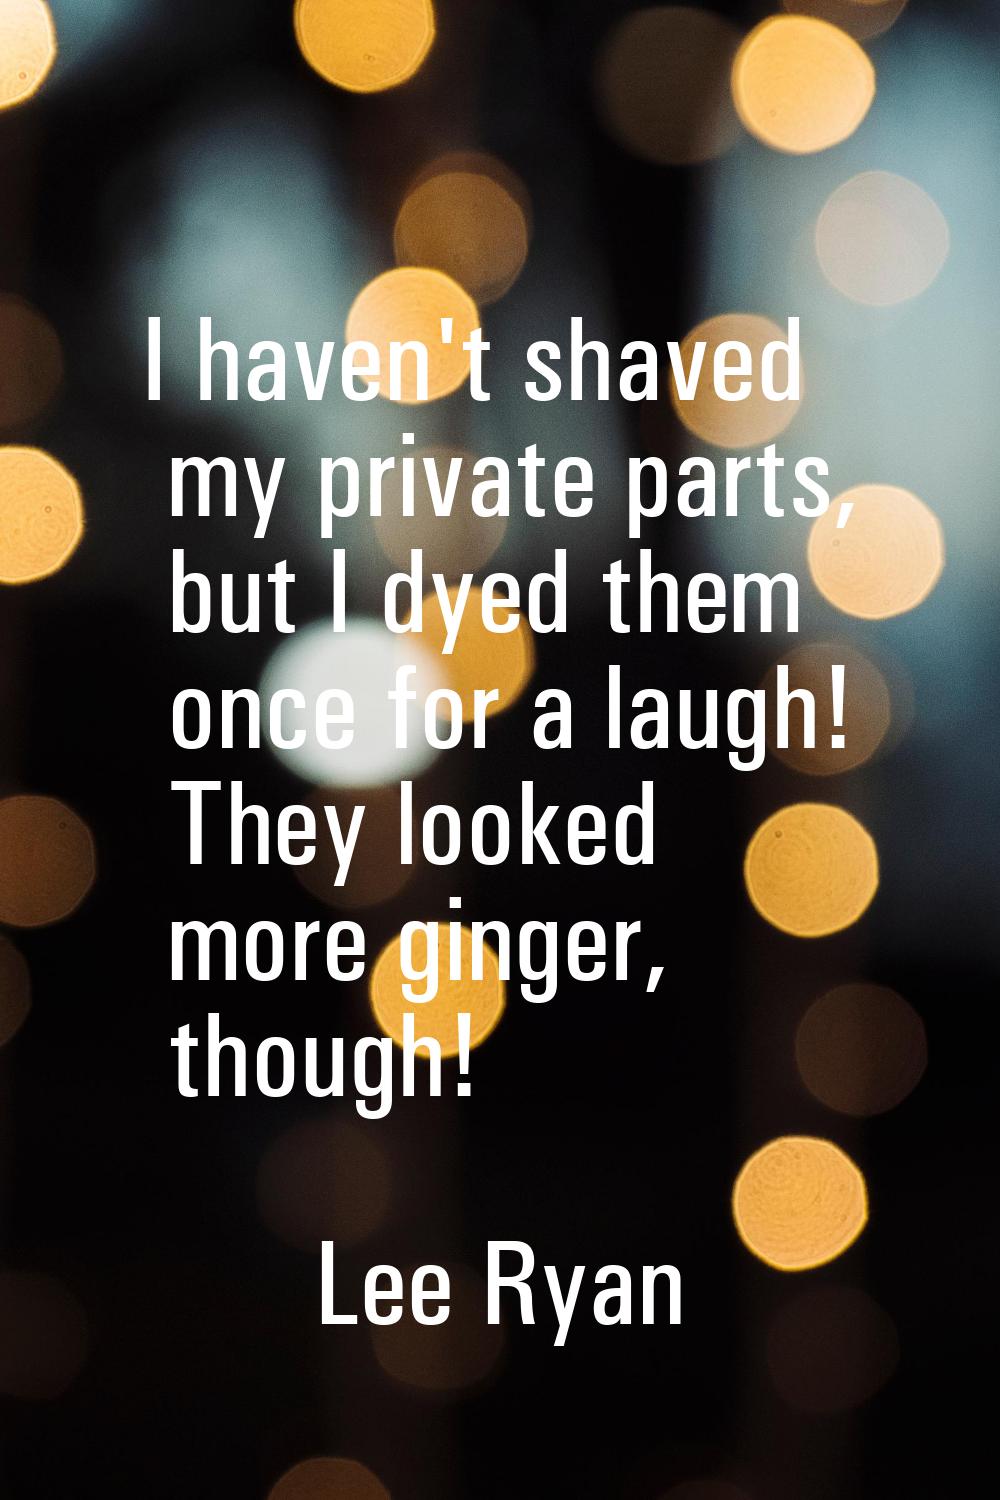 I haven't shaved my private parts, but I dyed them once for a laugh! They looked more ginger, thoug